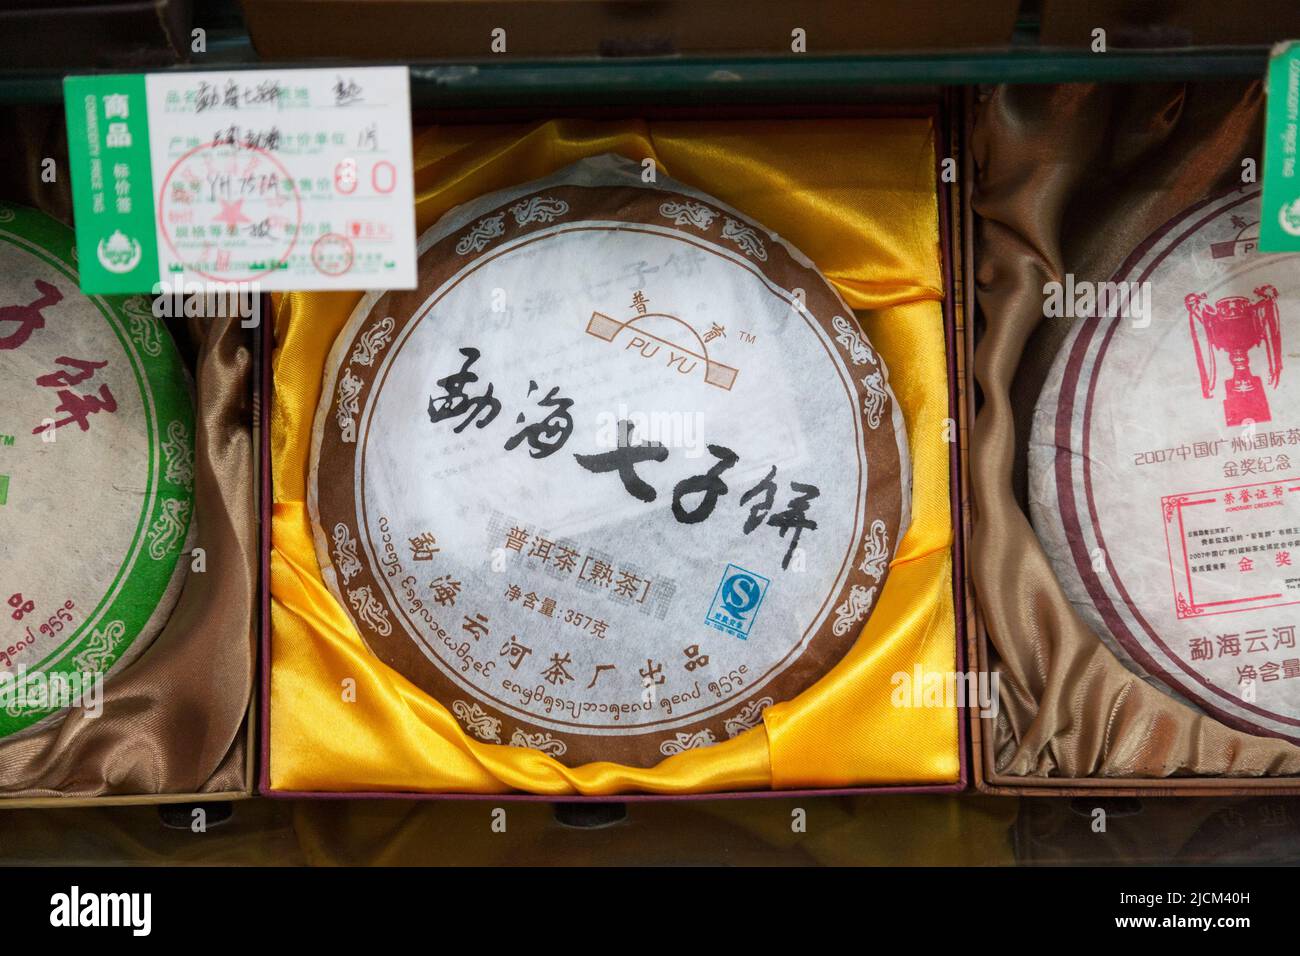 Display of tea which is described as pure cooked / baked tea, compressed into a cake rather than being sold as tea leaves. Xi'an. PRC. China. (125) Stock Photo